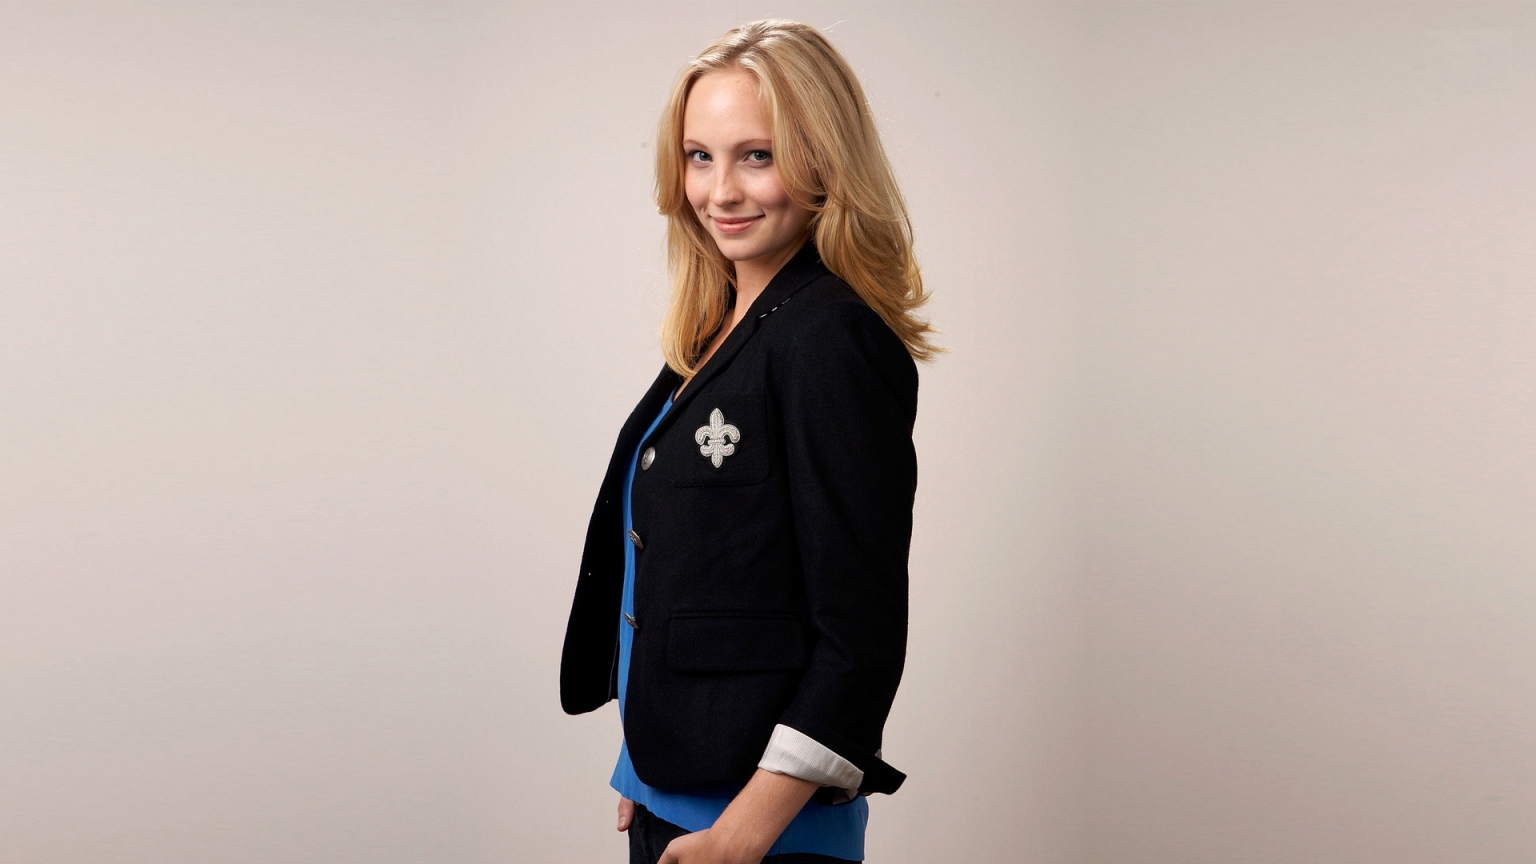 Candice Accola Smile for 1536 x 864 HDTV resolution